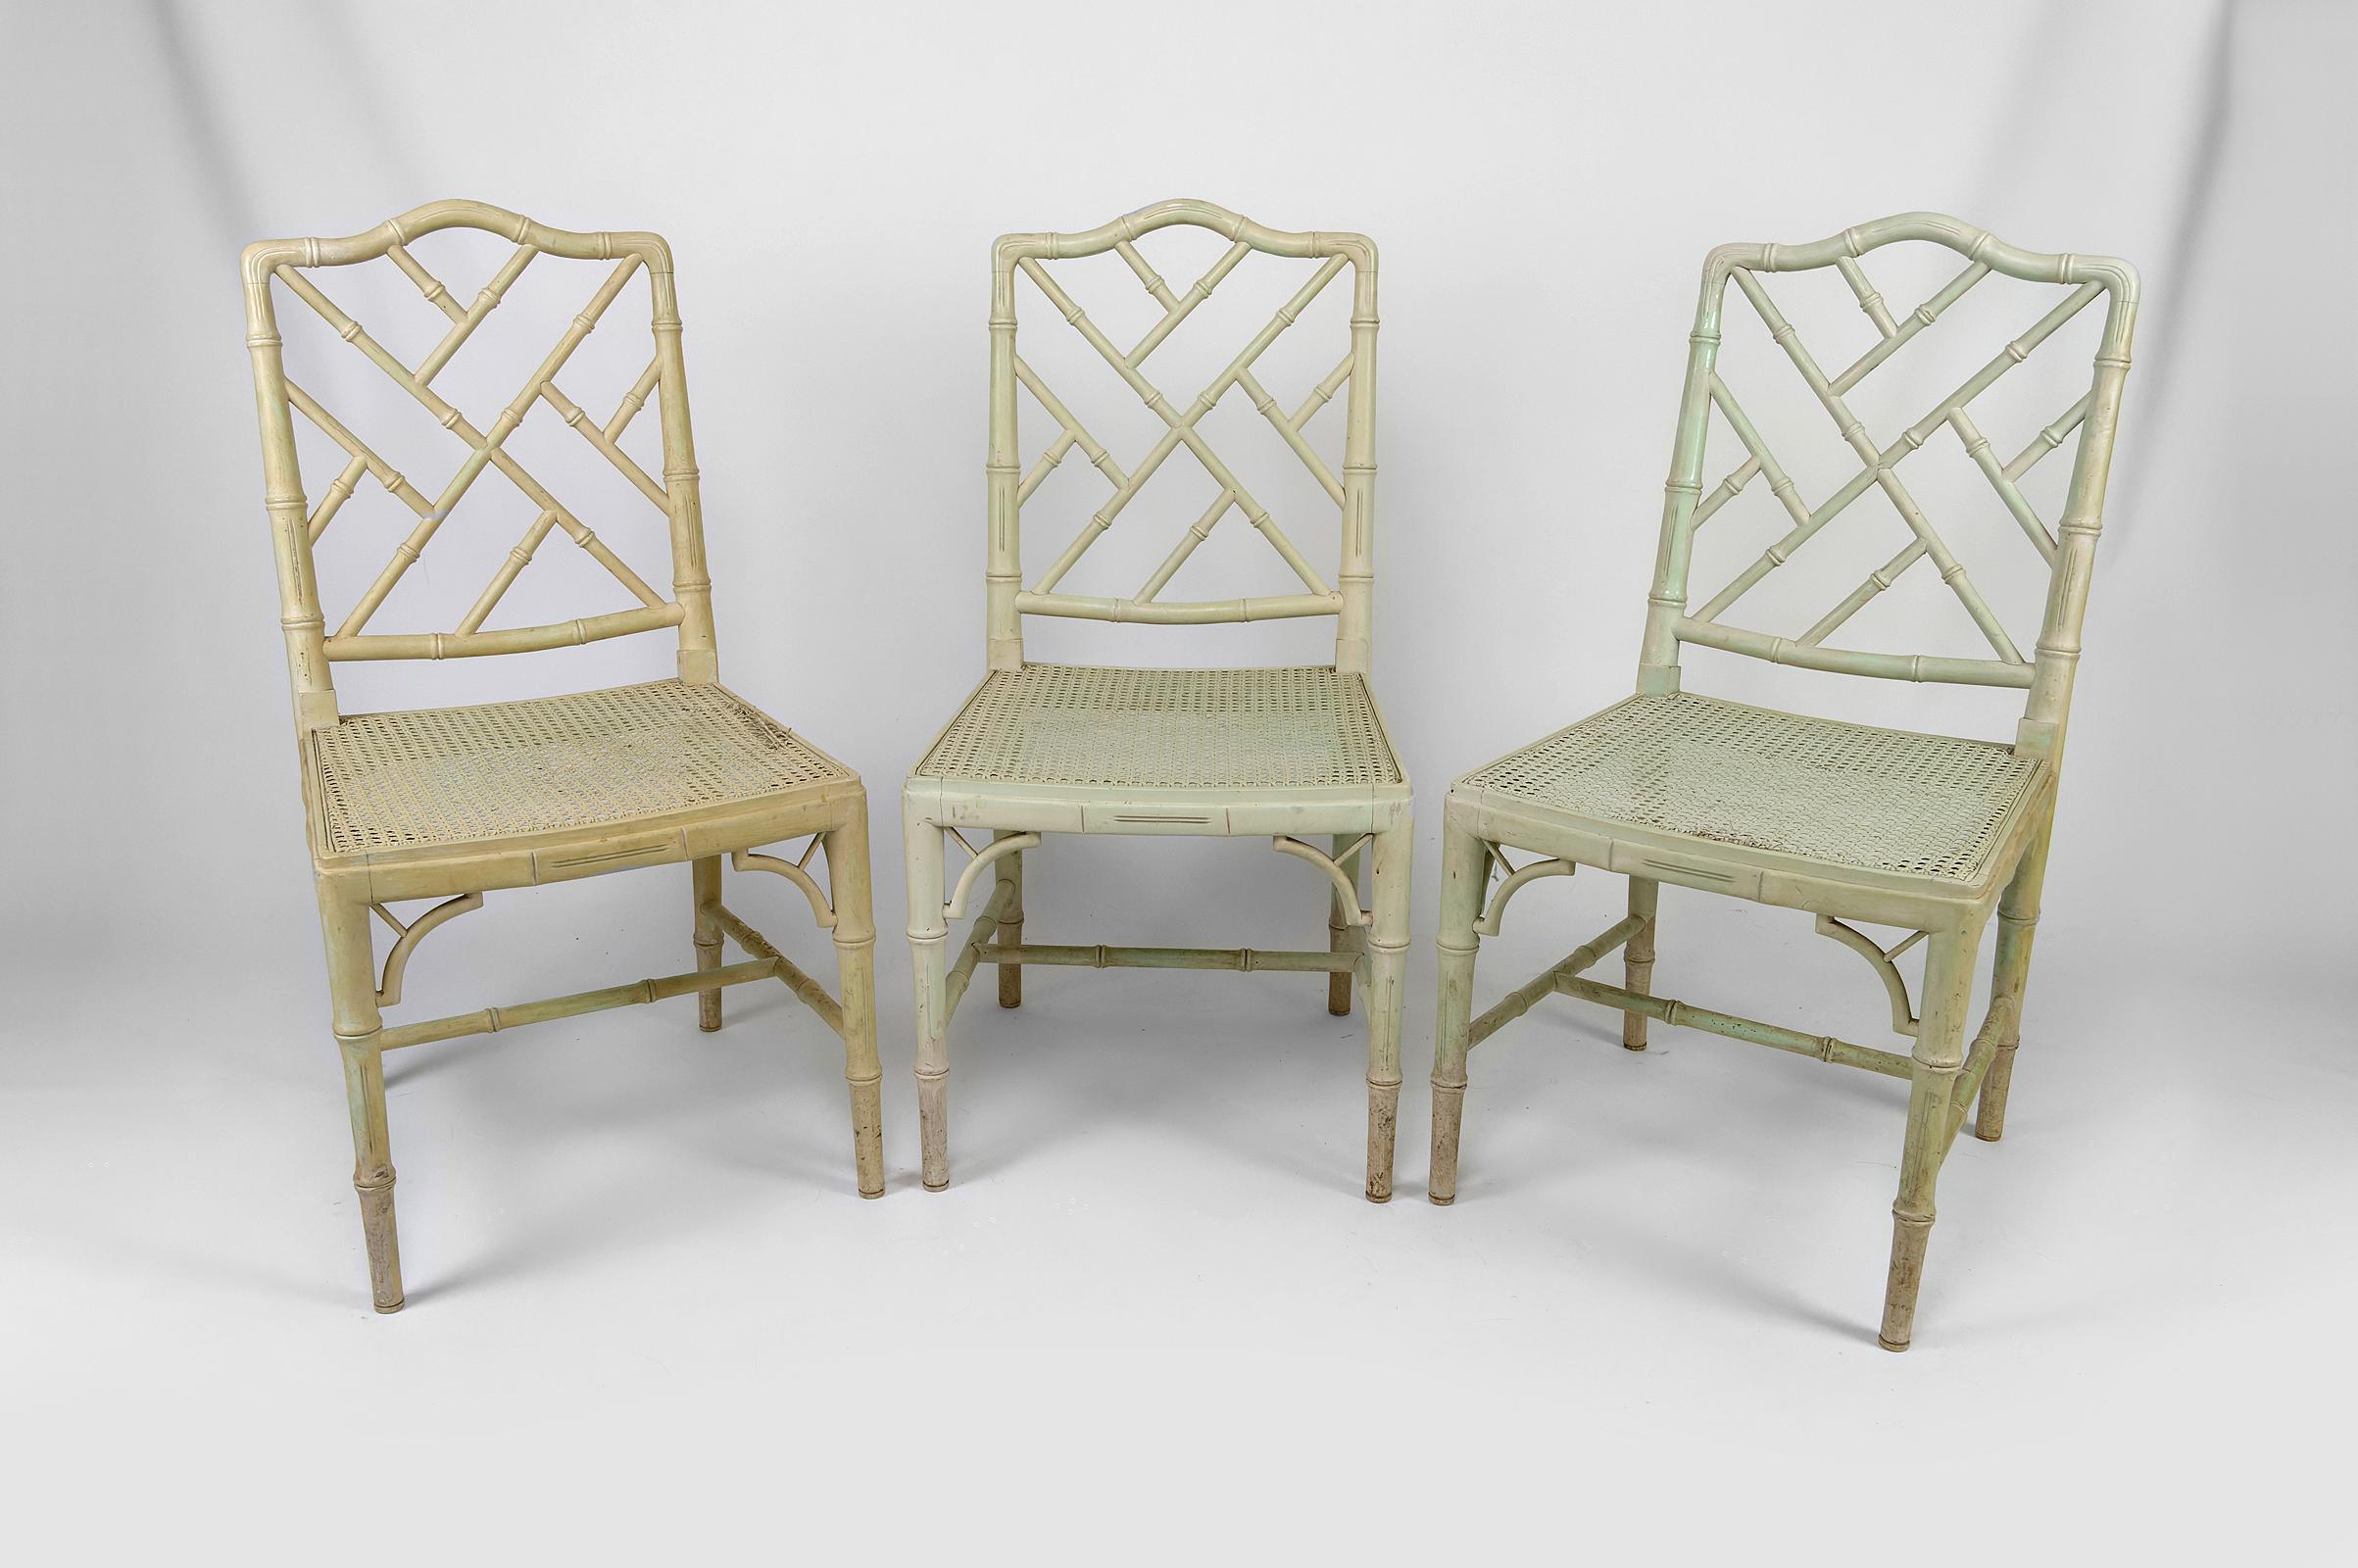 Set of 3 chairs in Asian style.

Japonism / Aesthetic Movement, France, circa 1900

Structure in good condition, traces of use. Damaged canings.

Dimensions:
height 92 cm
width 48 cm
depth 50 cm
seat height 42 cm